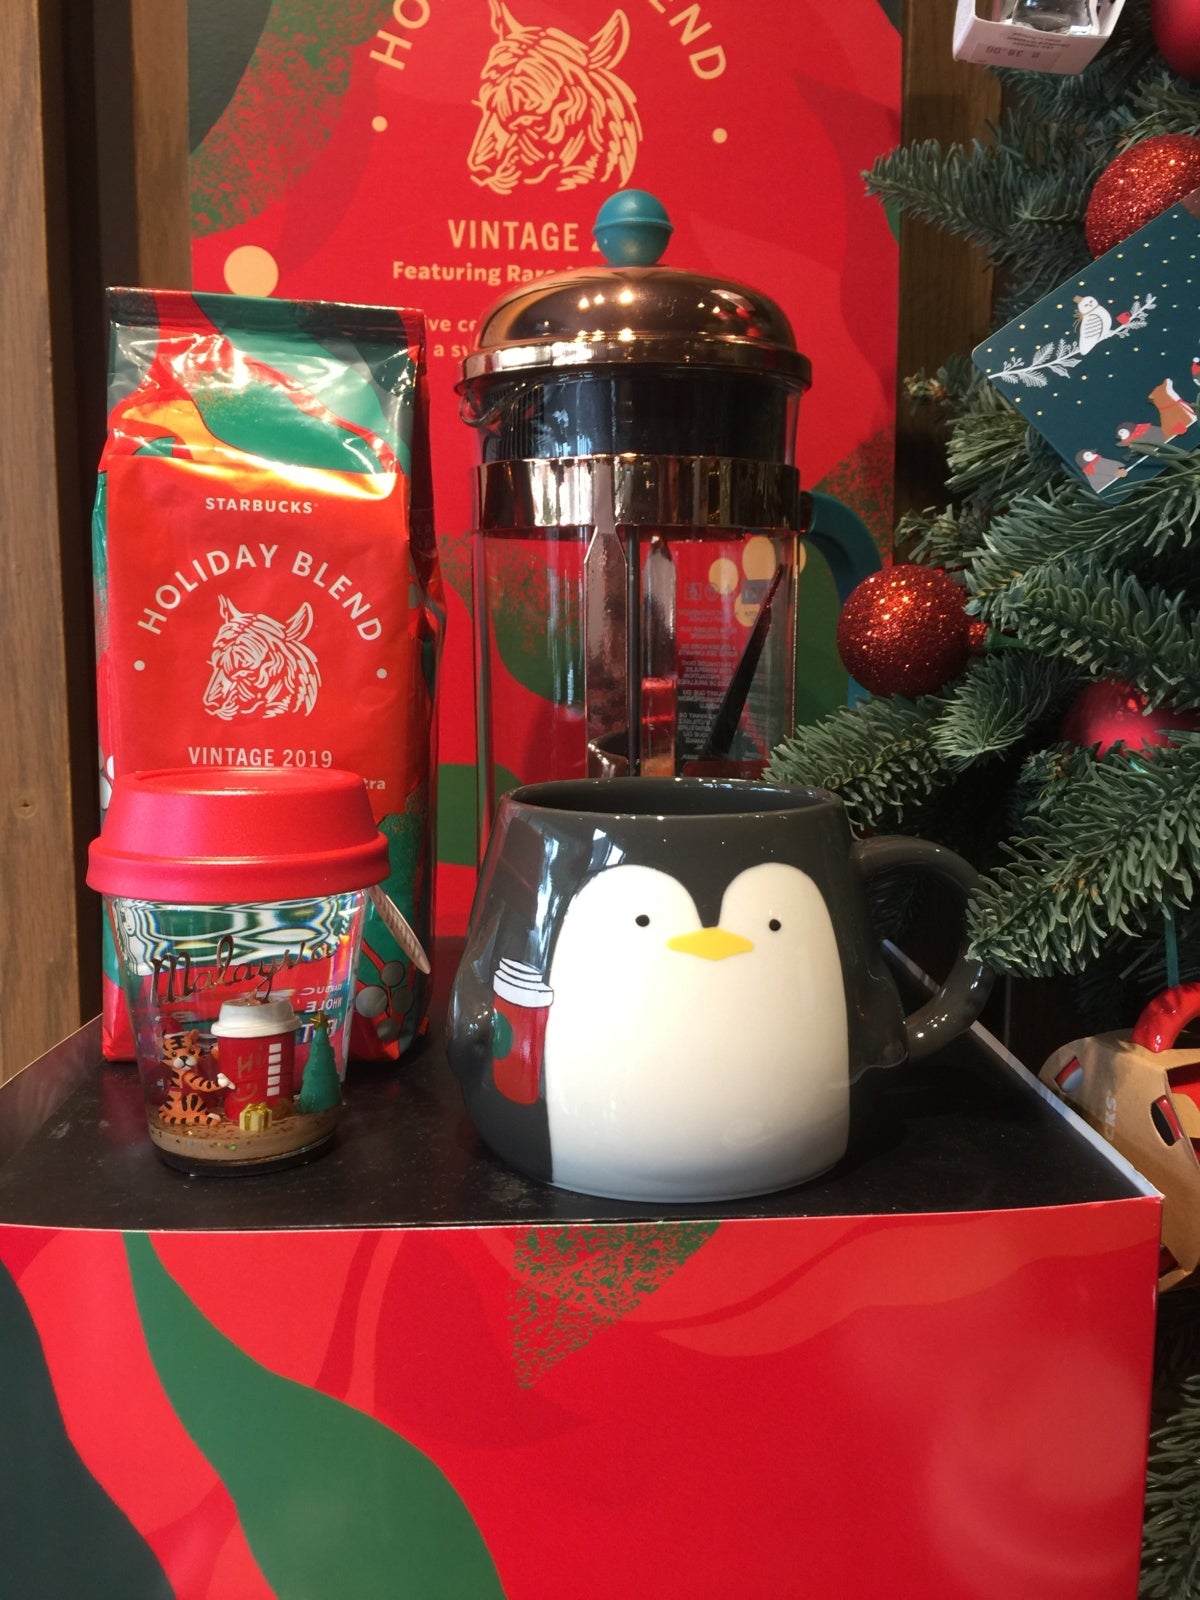 Starbucks M'sia New Holiday Collection Out on Nov 5 Is Adorned with Super Cute Polar Bears & Penguins! - WORLD OF BUZZ 1